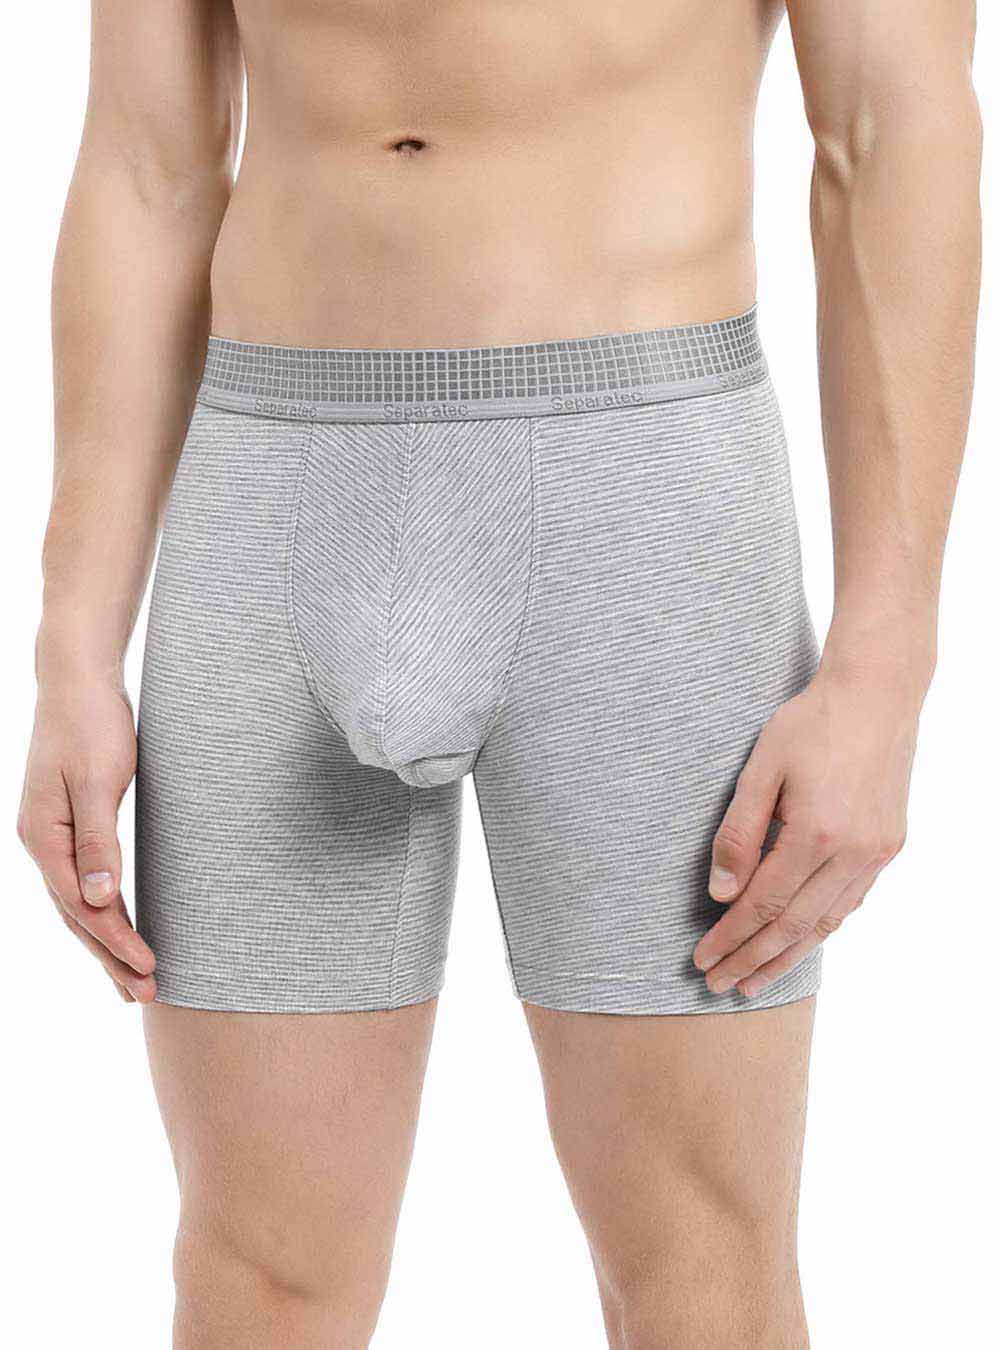 Supersoft Micromodal Boxer Briefs